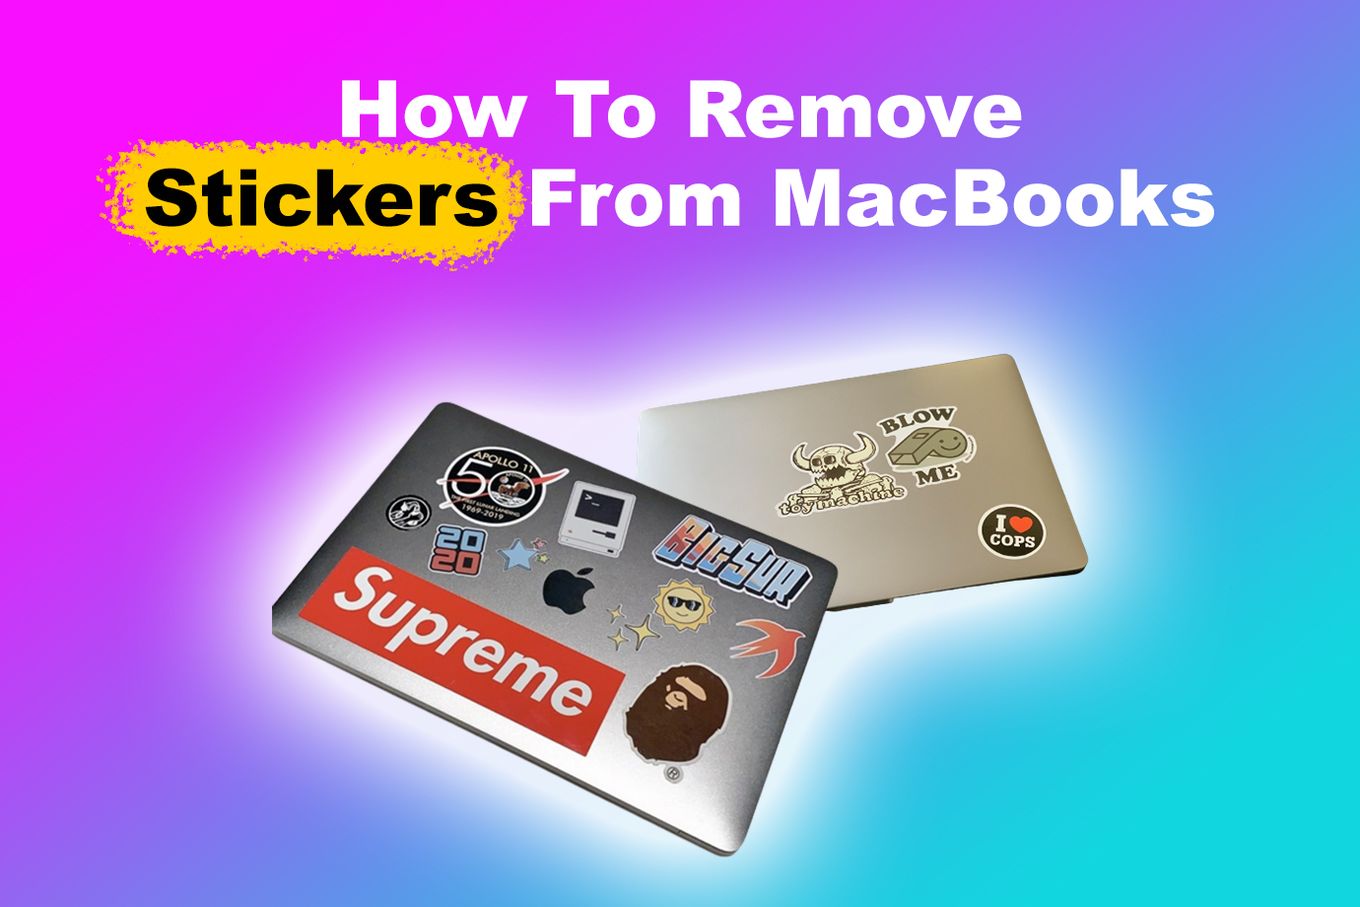 How to remove stickers from MacBooks